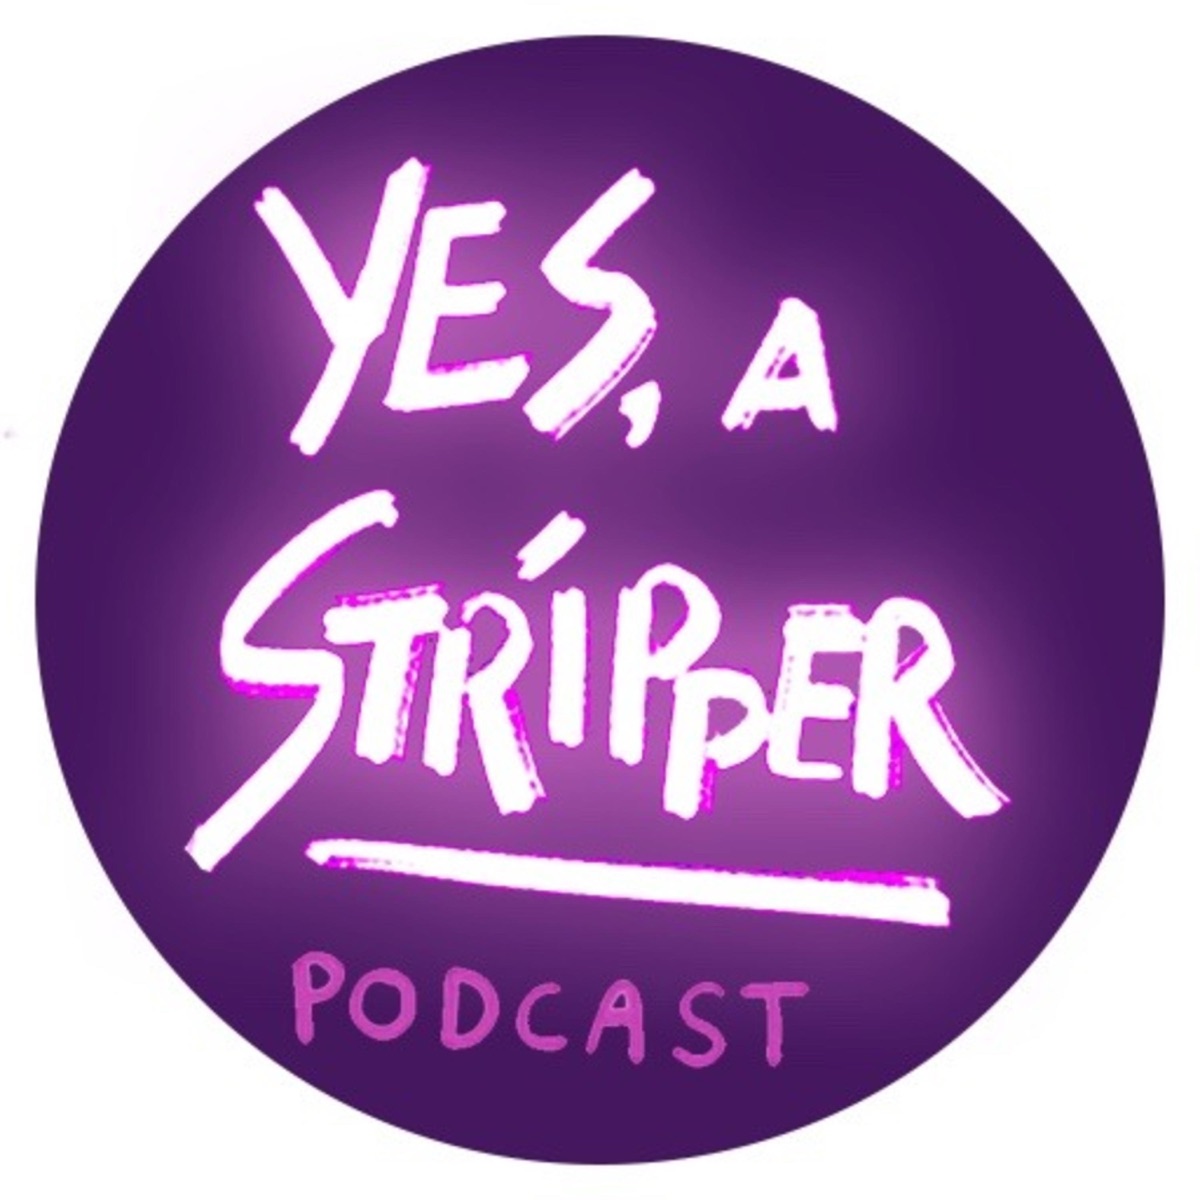 Yes, a Stripper Podcast – Podcast